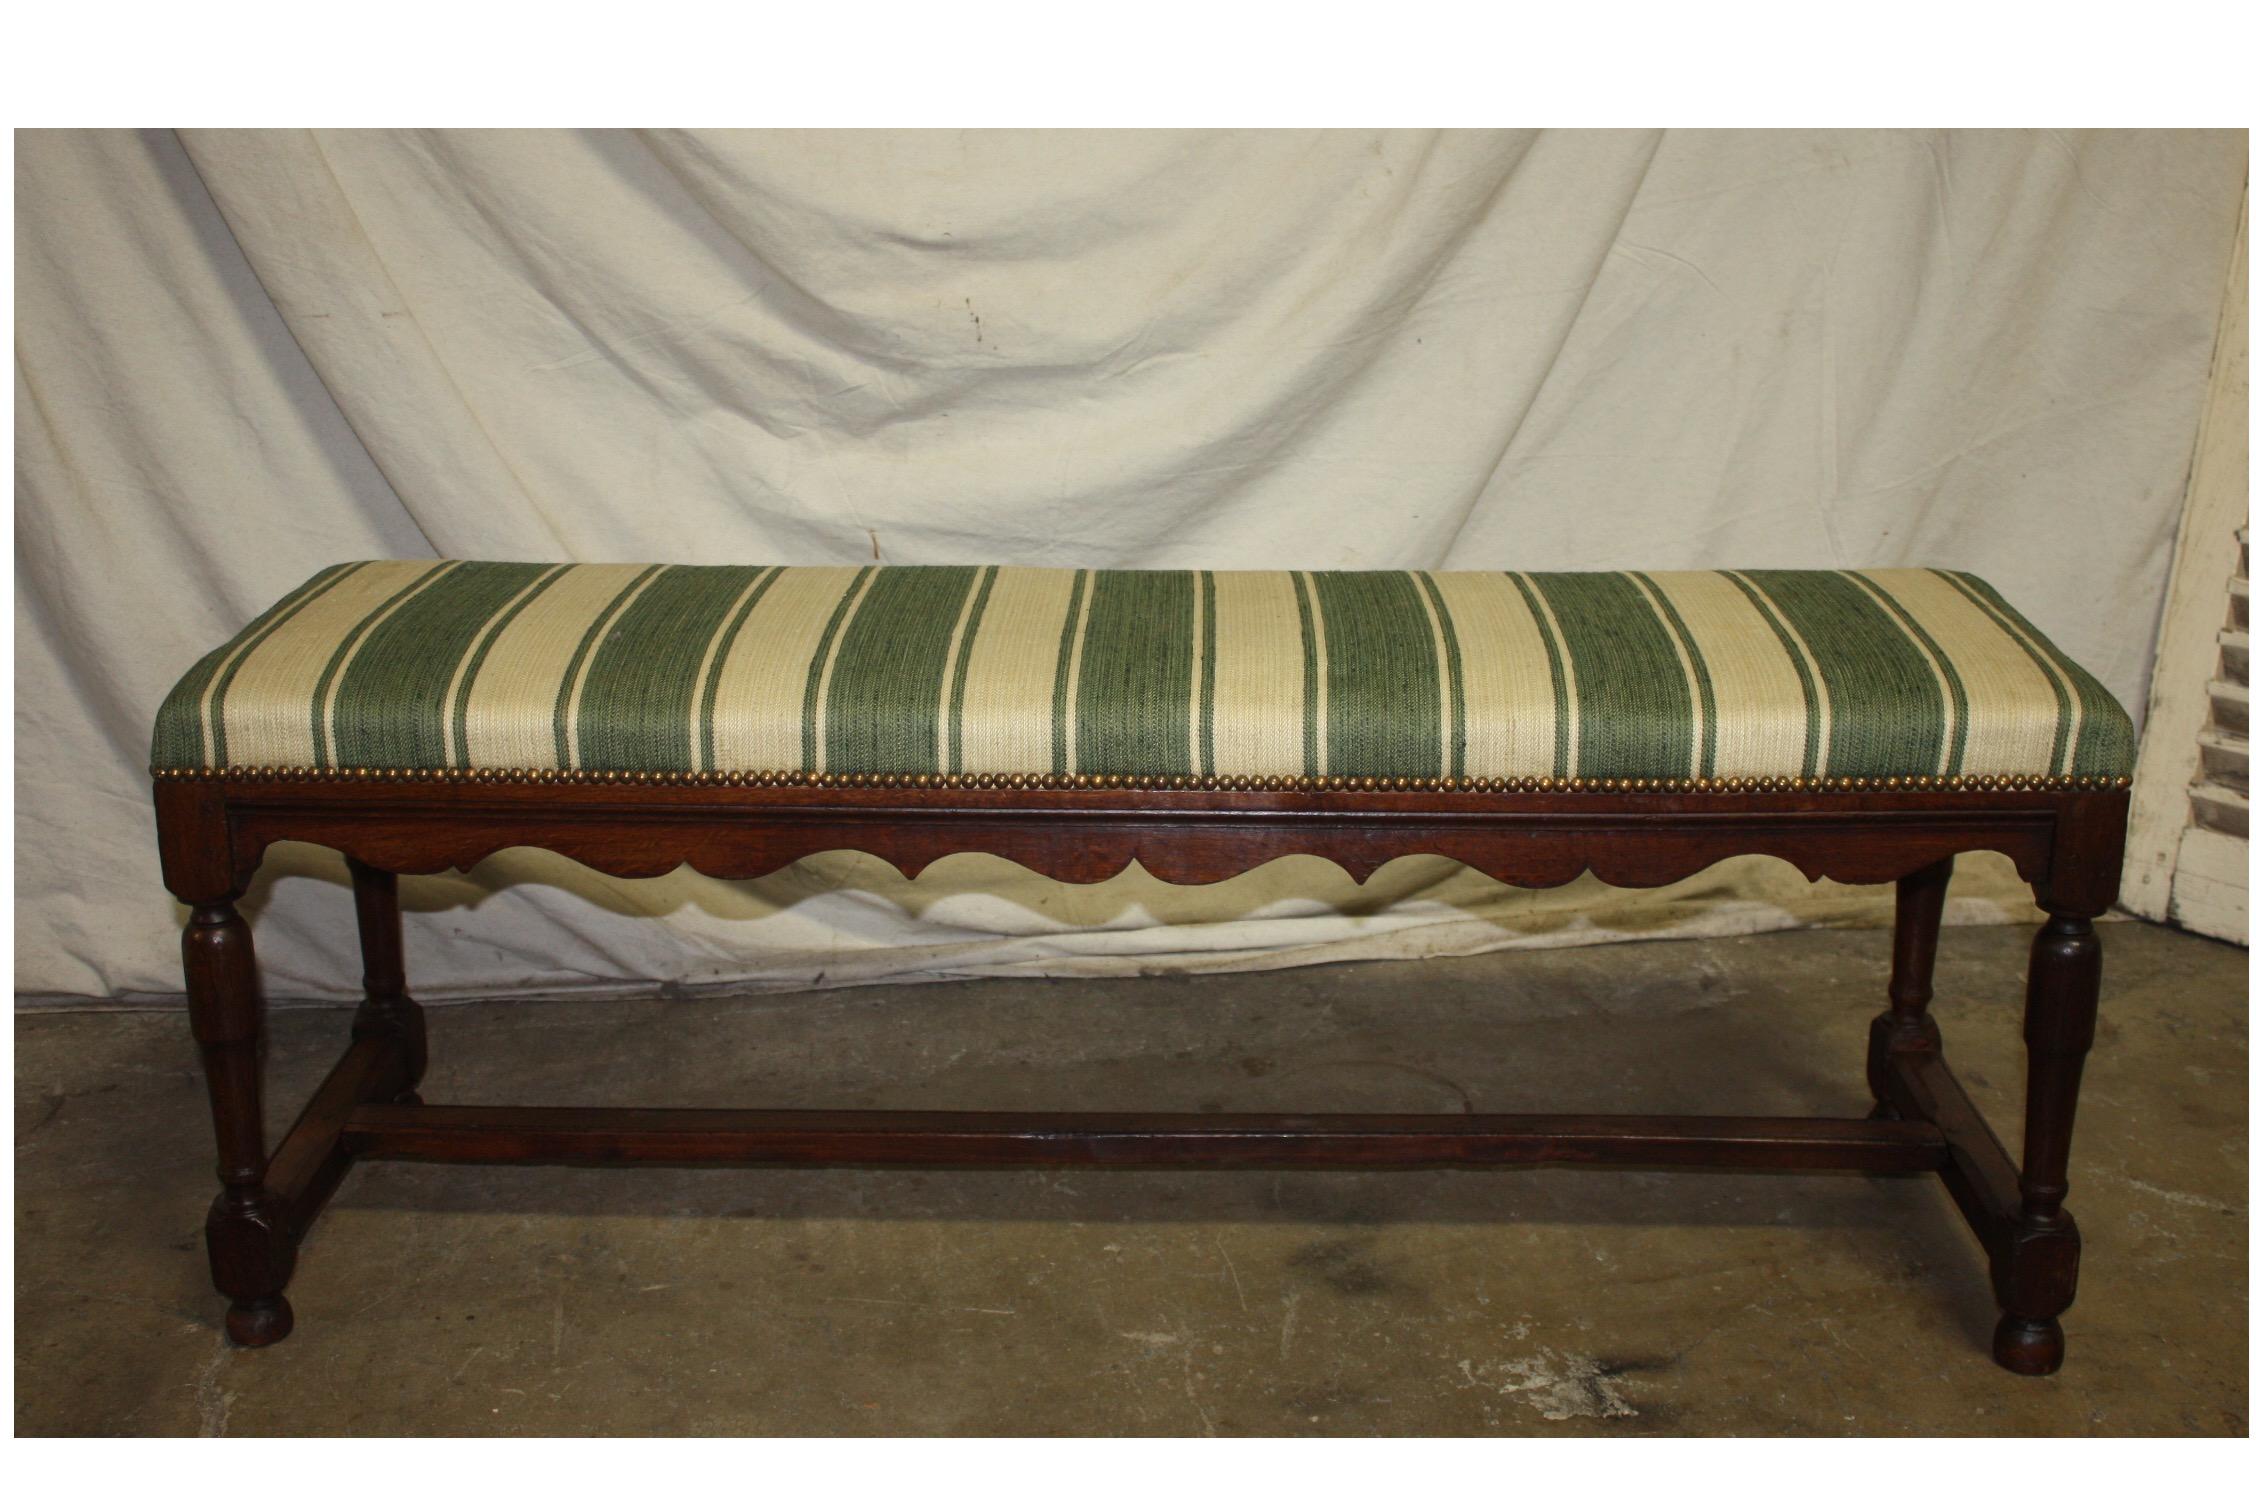 Beautiful French 18th century bench.